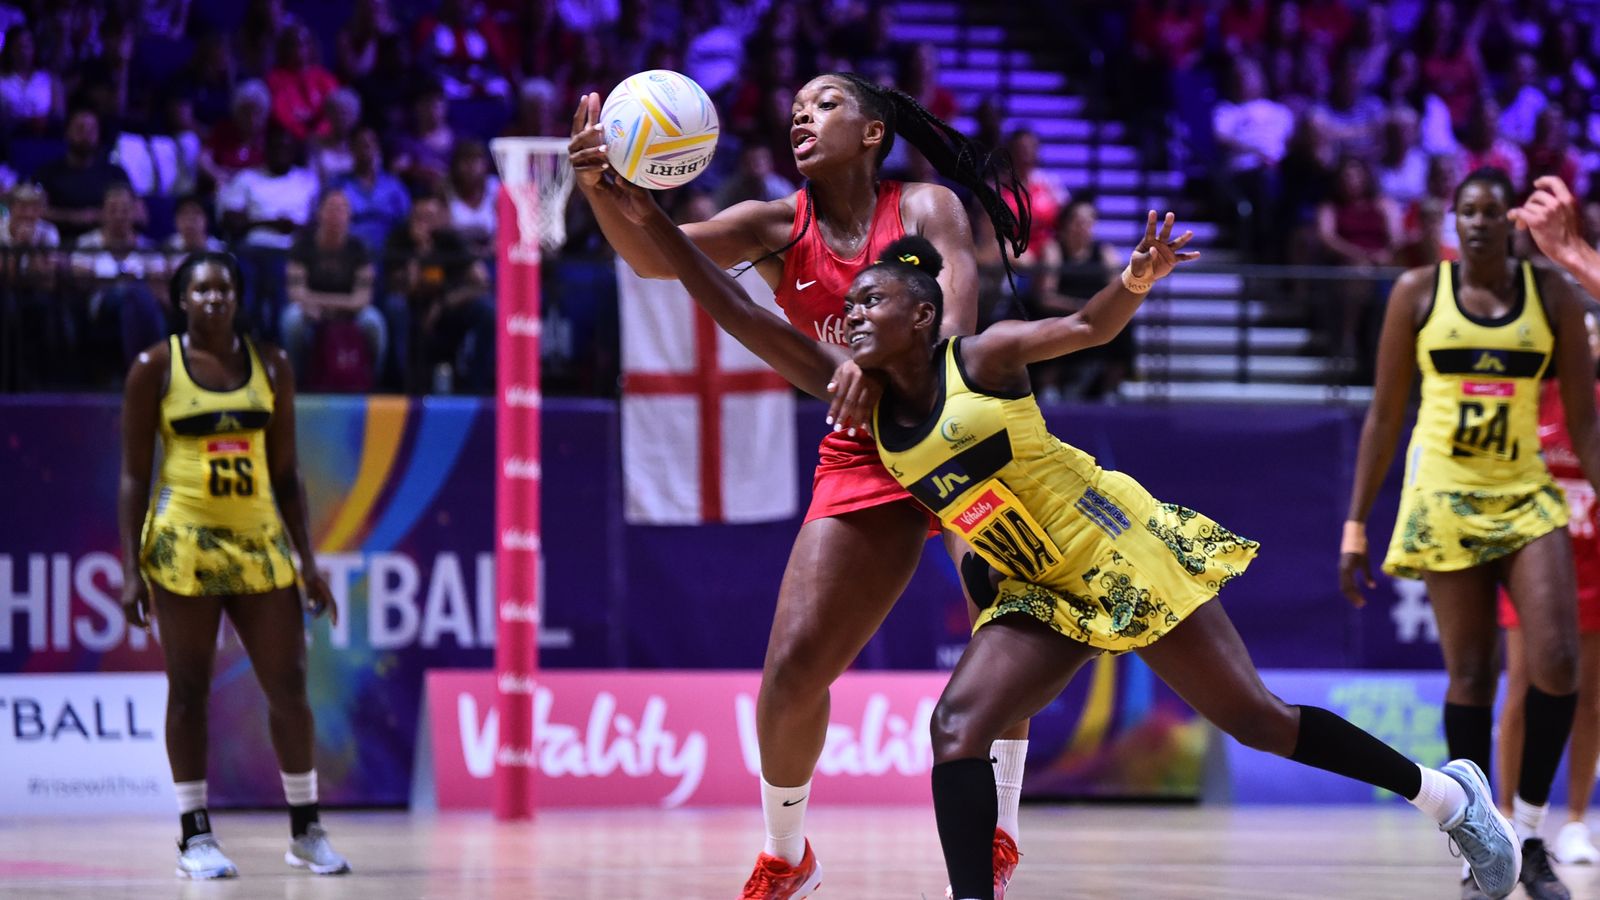 Tamsin Greenway believes netball must pull together as one for global benefits - Sky Sports